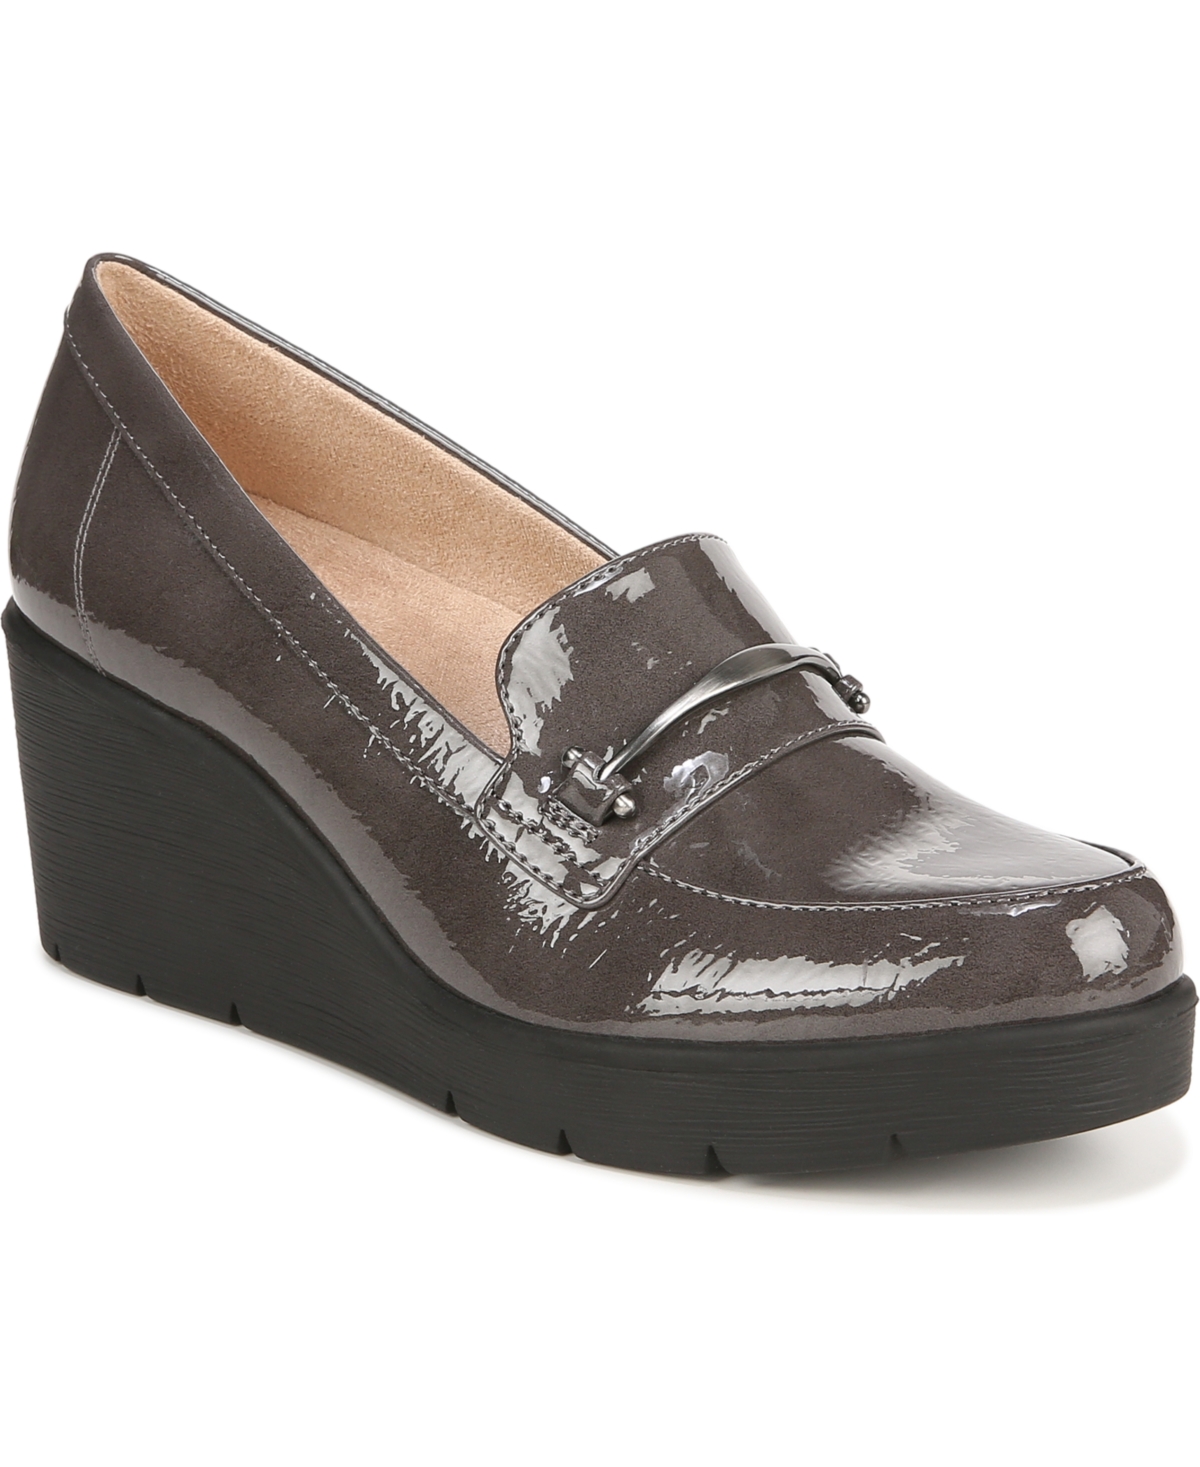 SOUL NATURALIZER ACHIEVE WEDGE LOAFERS